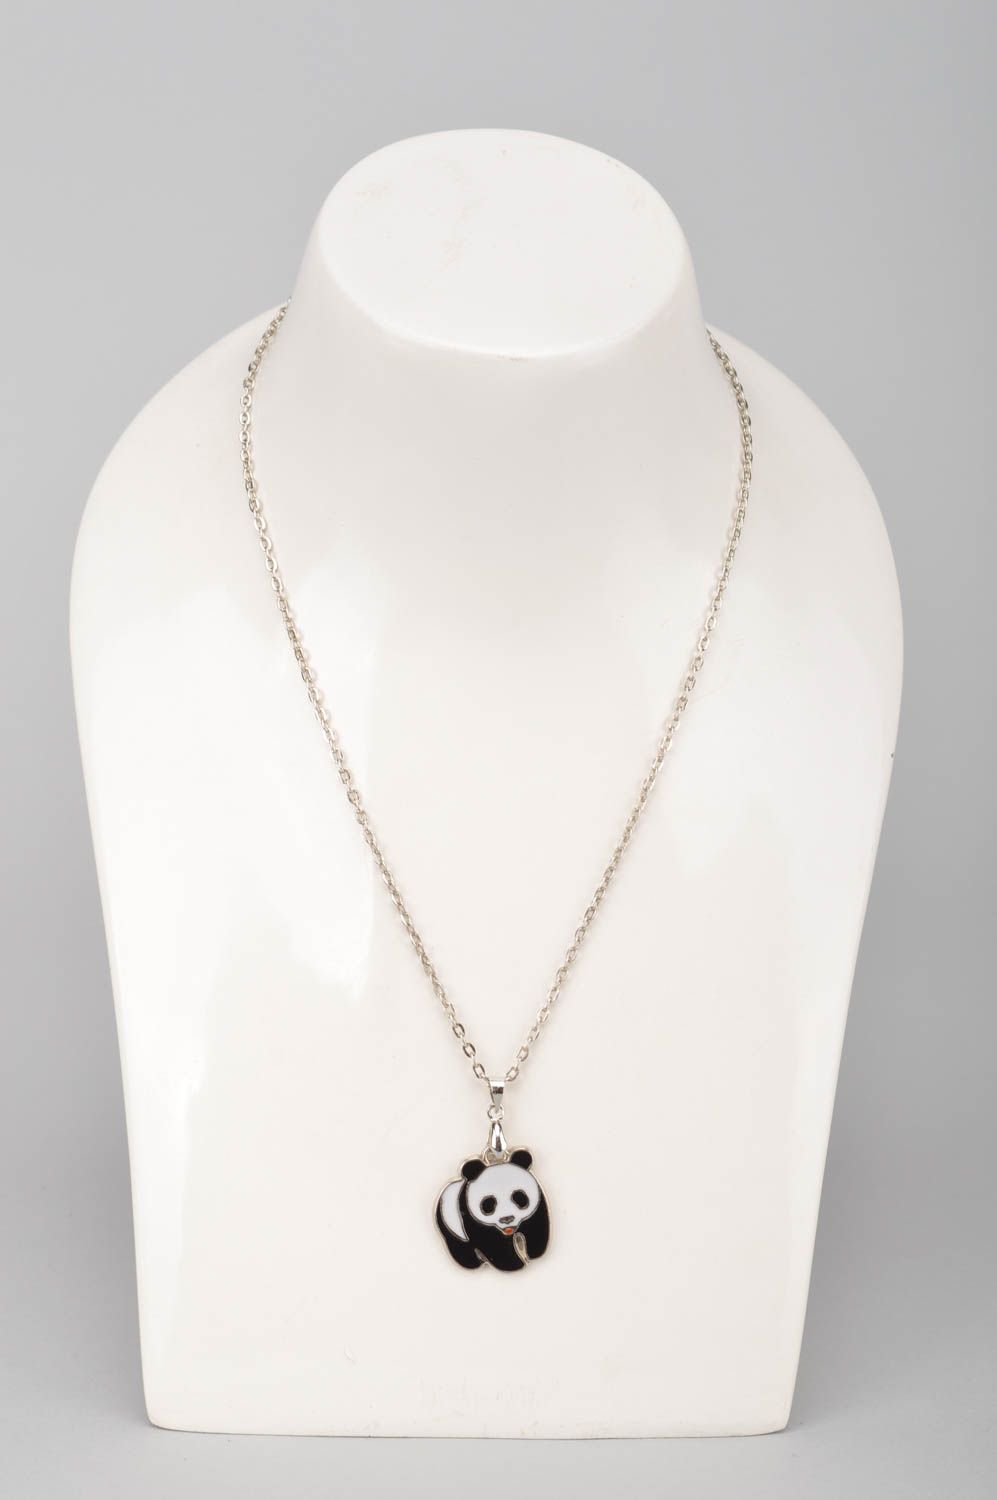 Unusual homemade metal pendant panda fashion jewelry trends gifts for her photo 2